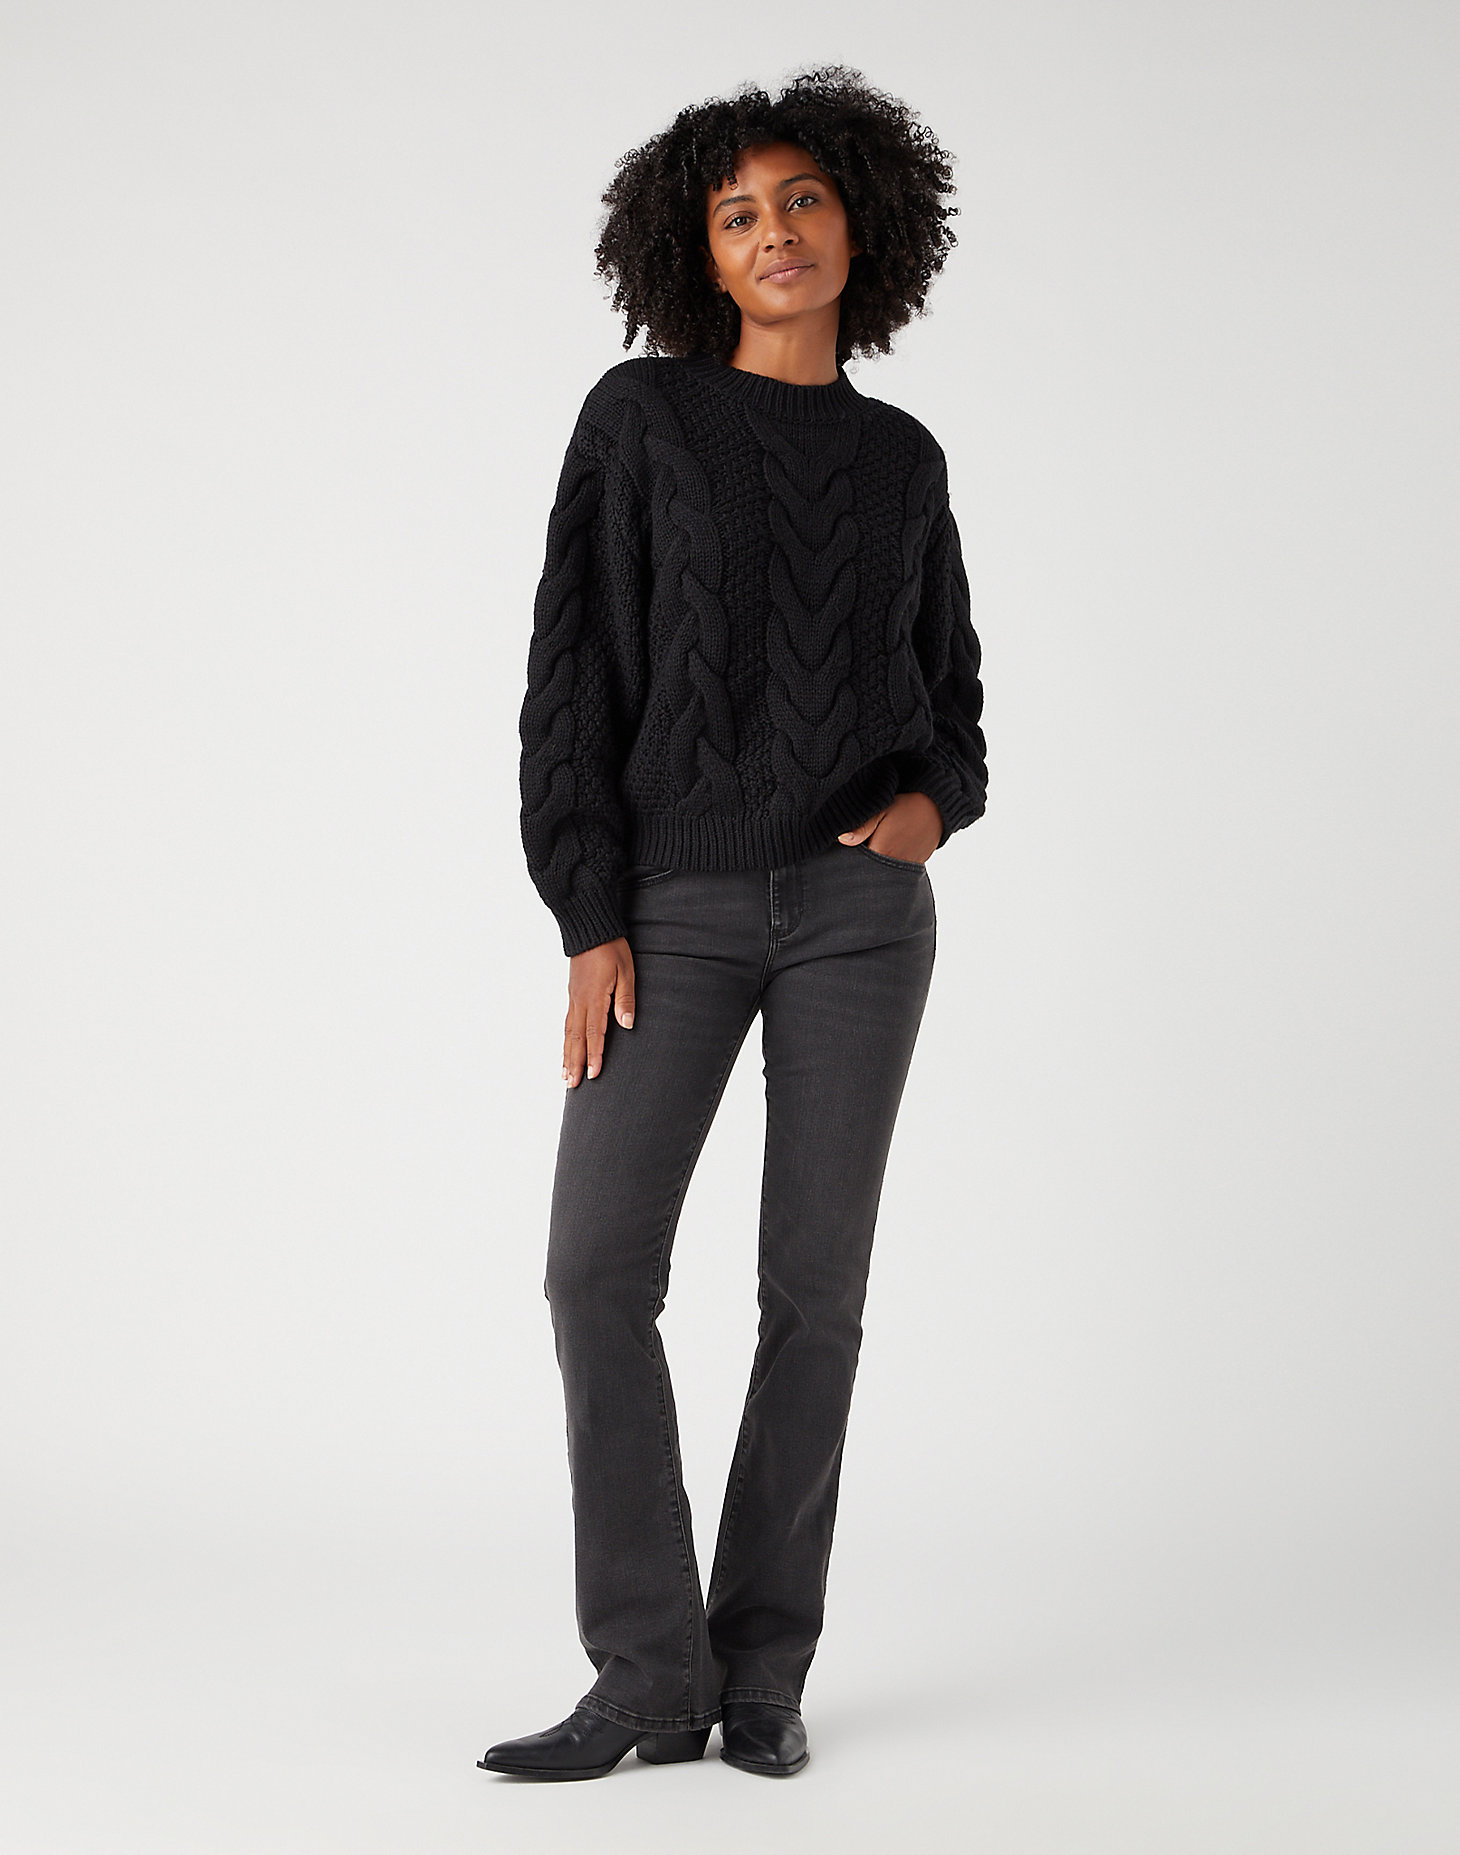 Crew Neck Cable Knit in Black alternative view 1